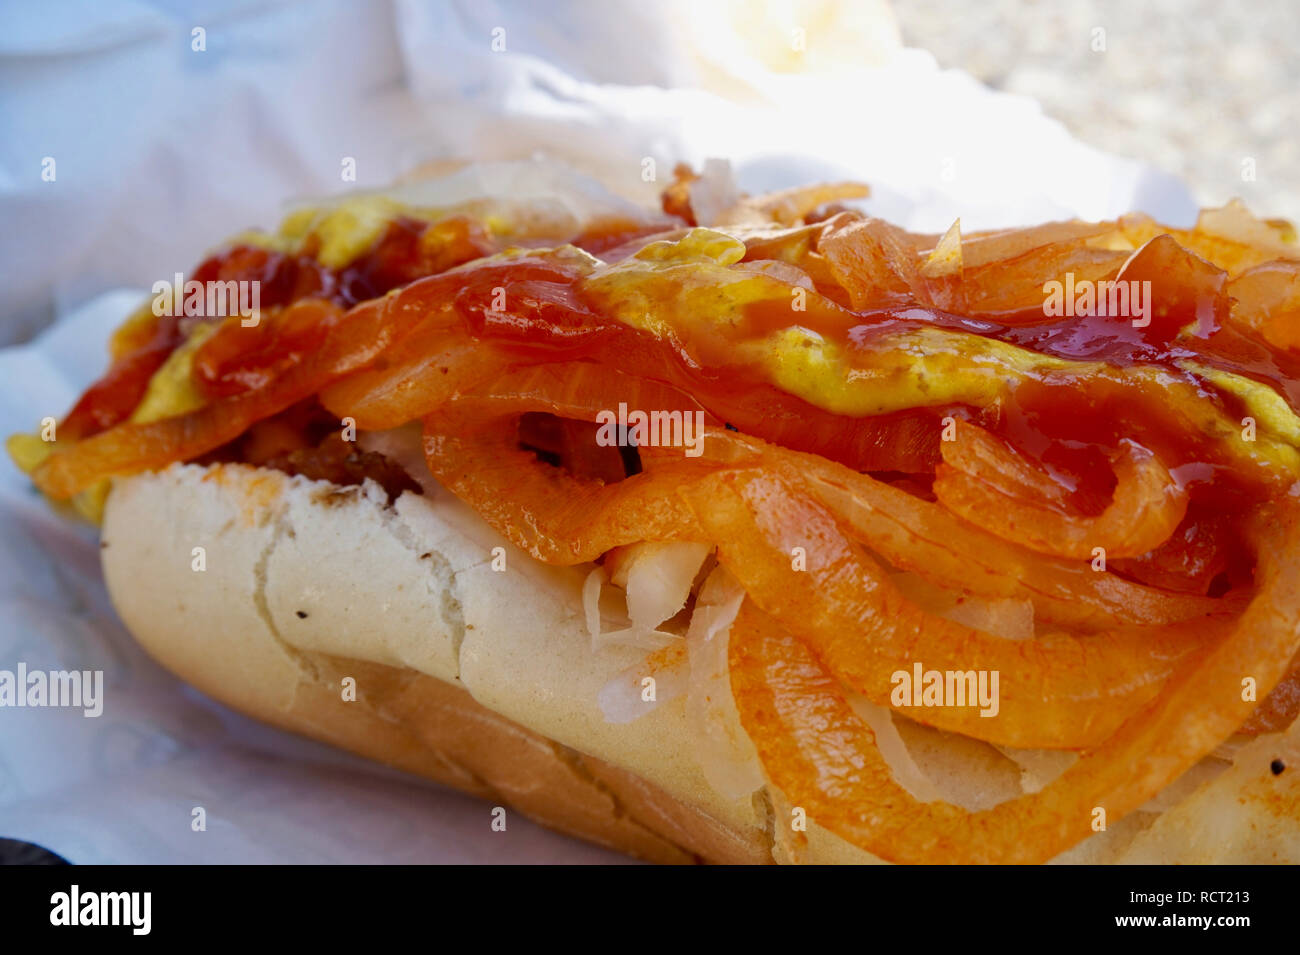 Hot dog close up smothered in ketchup, mustard, onion topping, showing the hot dog bun. Nathan's Famous hot dog, Coney Island, NY. Stock Photo